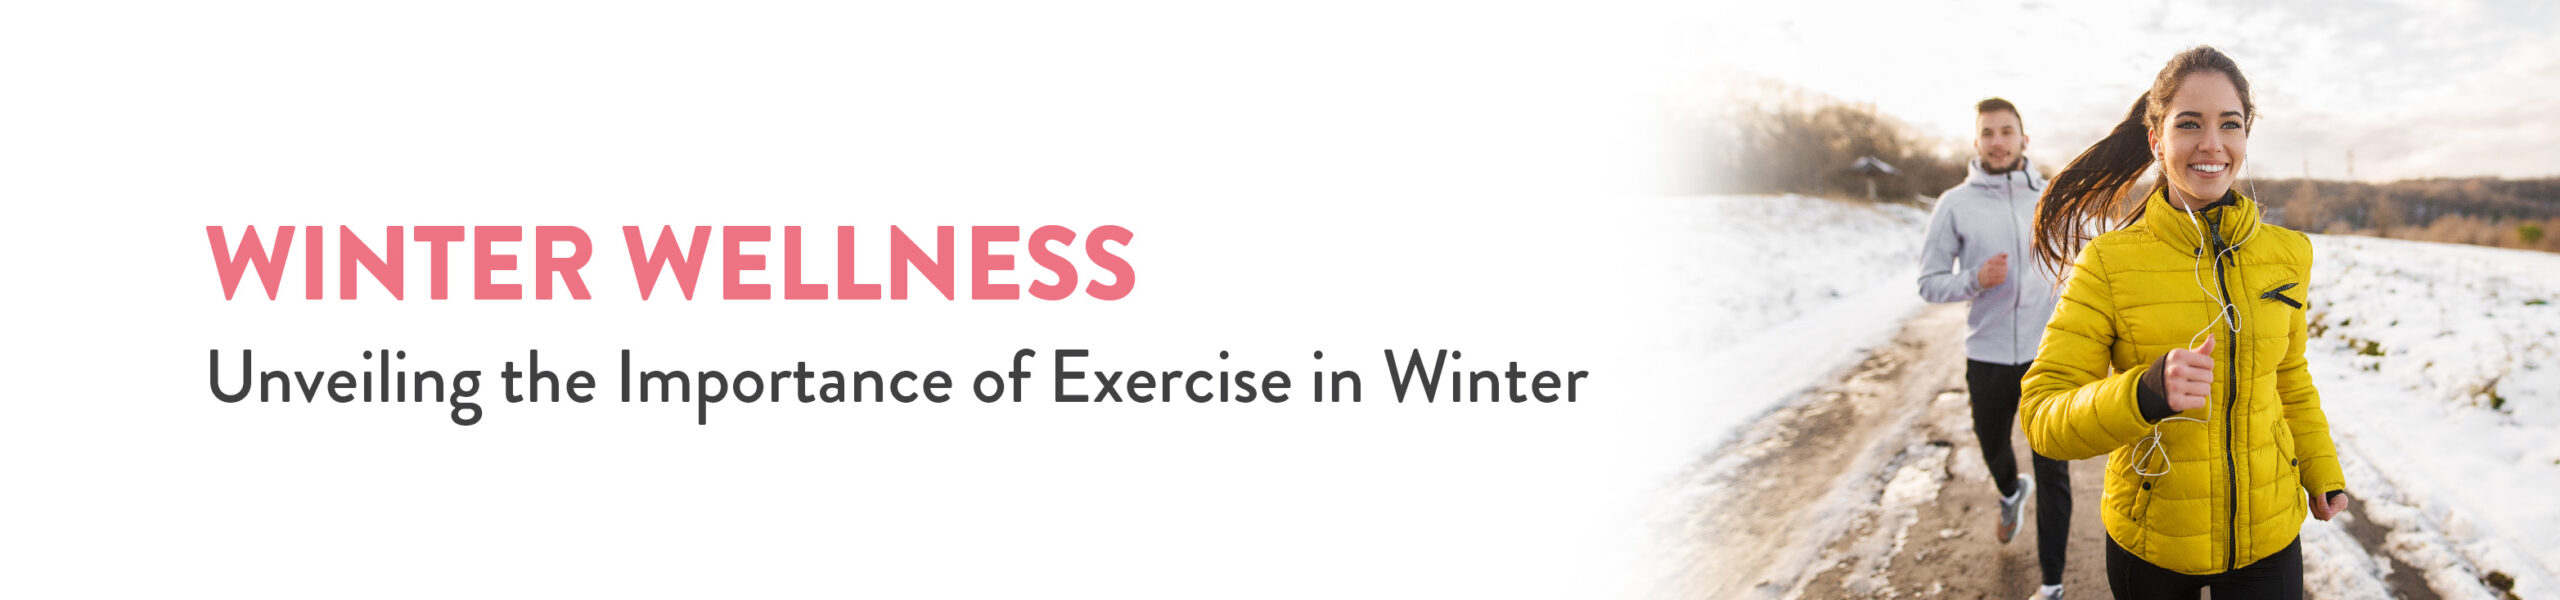 winter wellness - importance of exercise